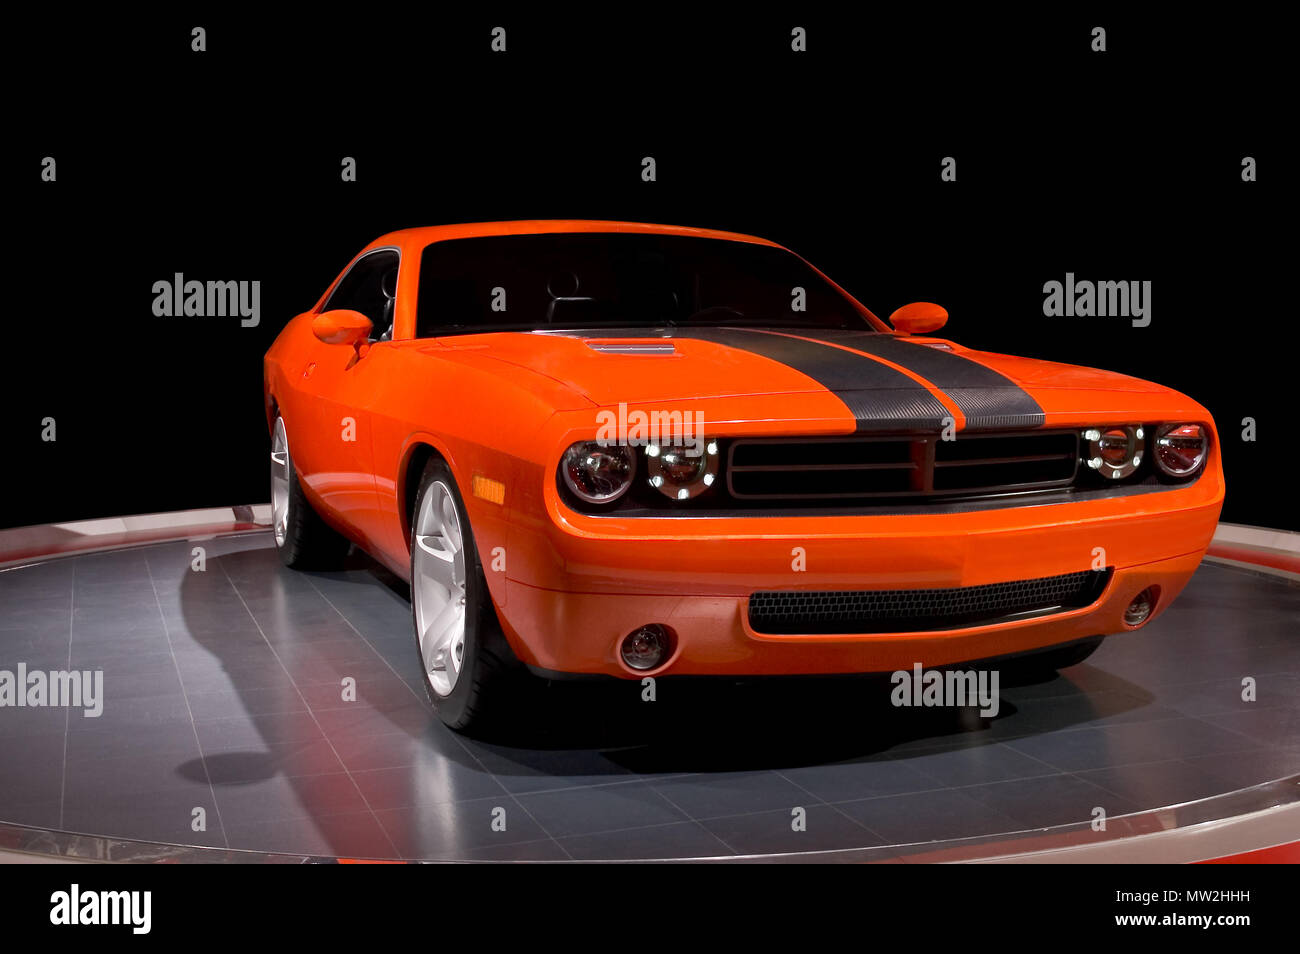 Awesome looking Dodge Challenger Concept car.  More car photos available in my gallery. Stock Photo